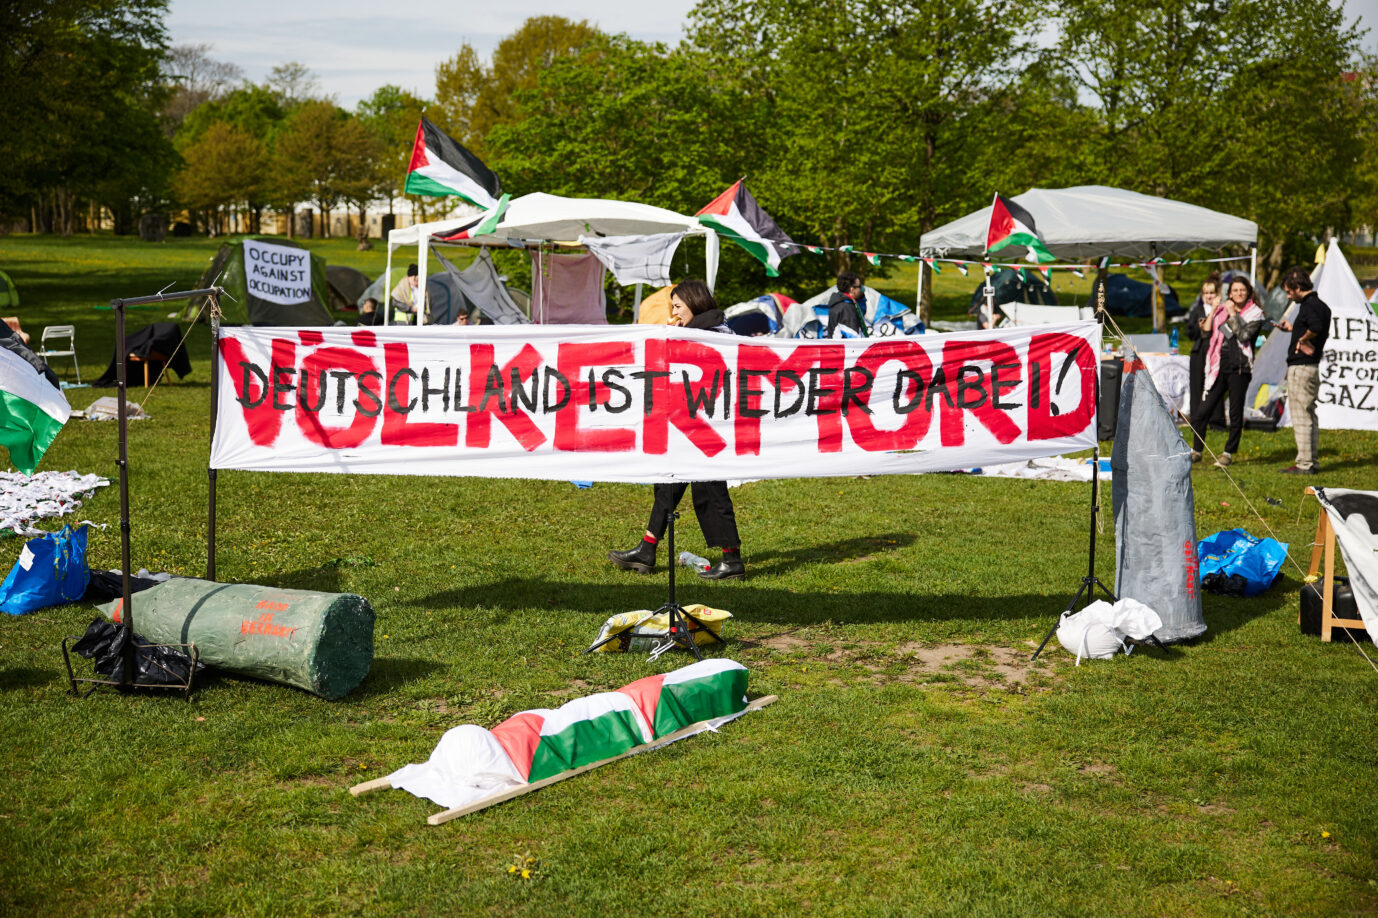 Hitler, weapons and violence – that’s how radical the Palestine camp in Berlin is